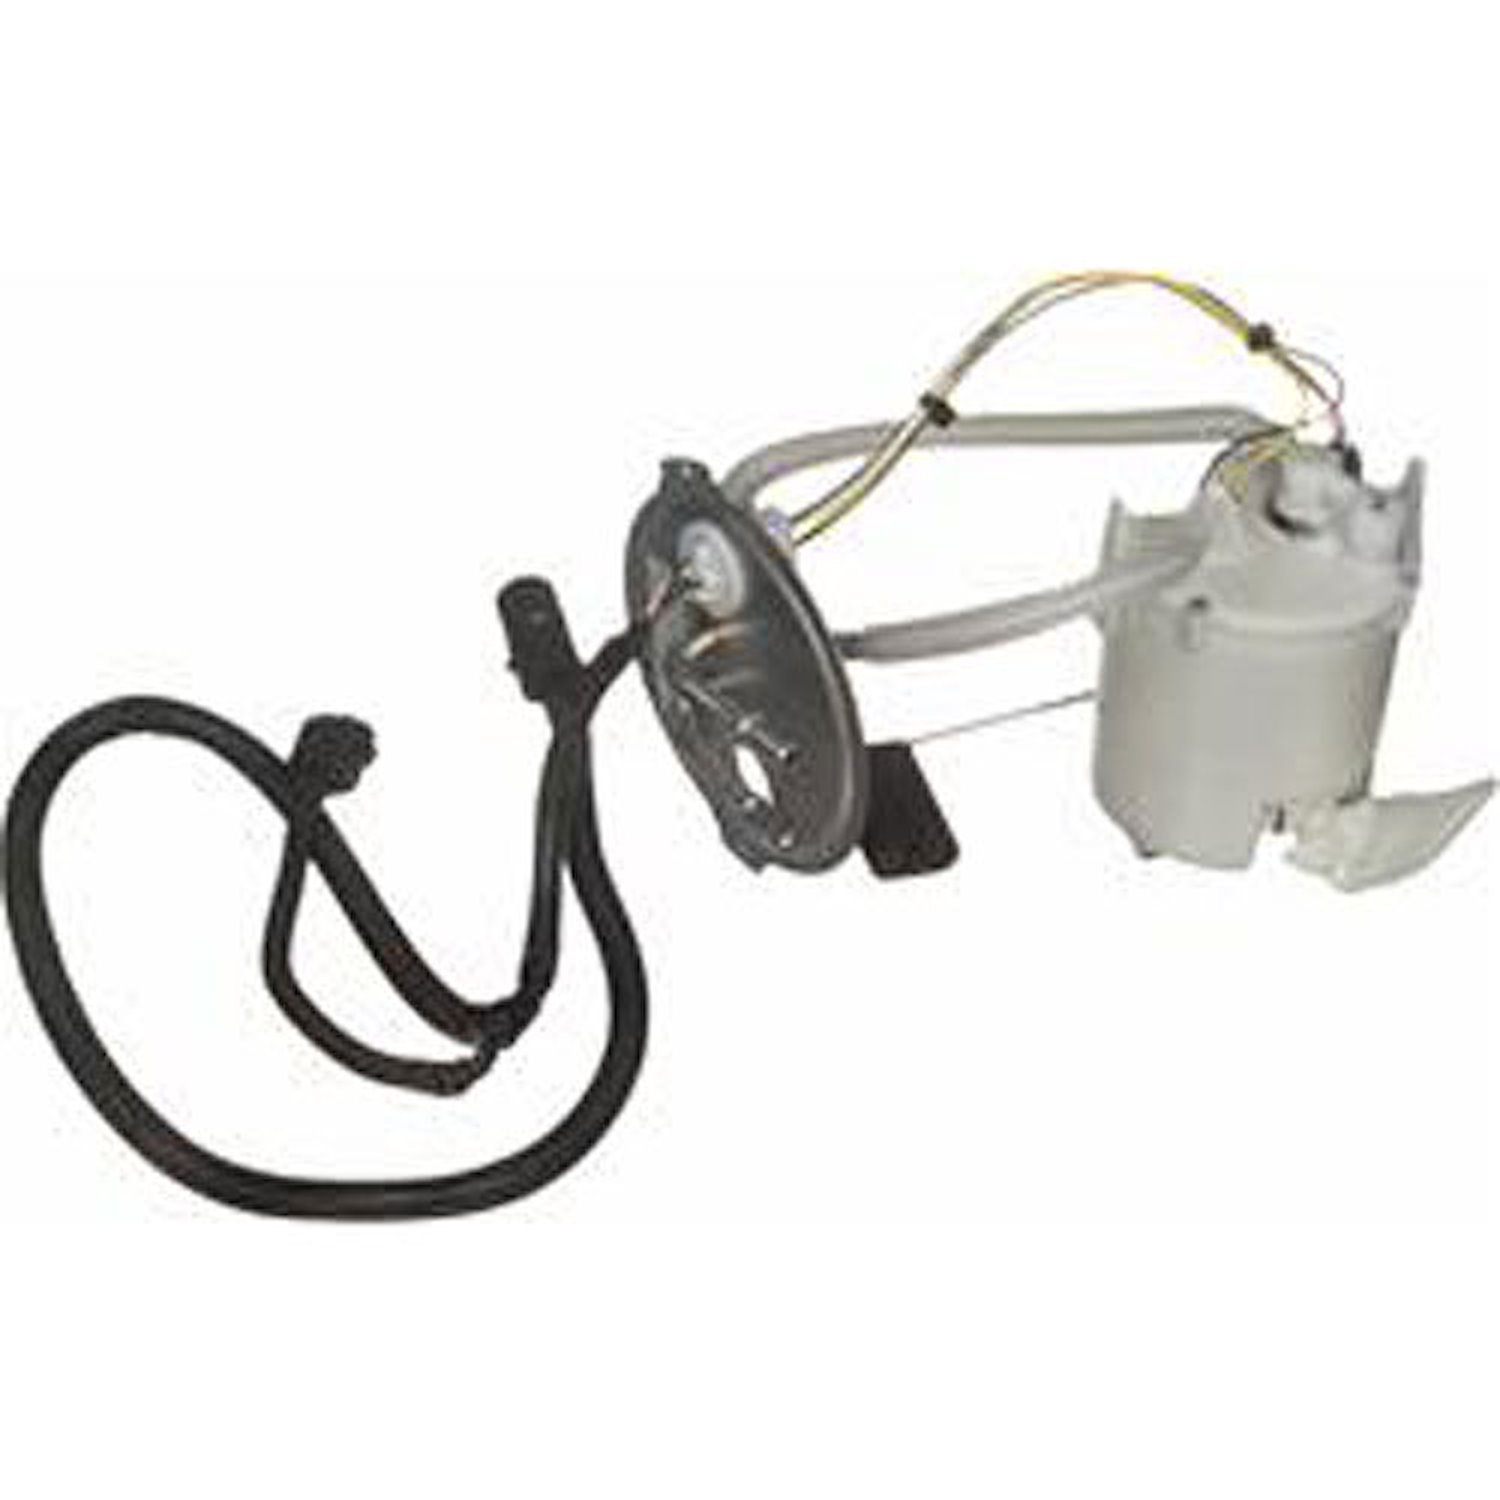 OE Ford Replacement Electric Fuel Pump Module Assembly 1997-98 Ford Windstar 3.0L/3.8L V6